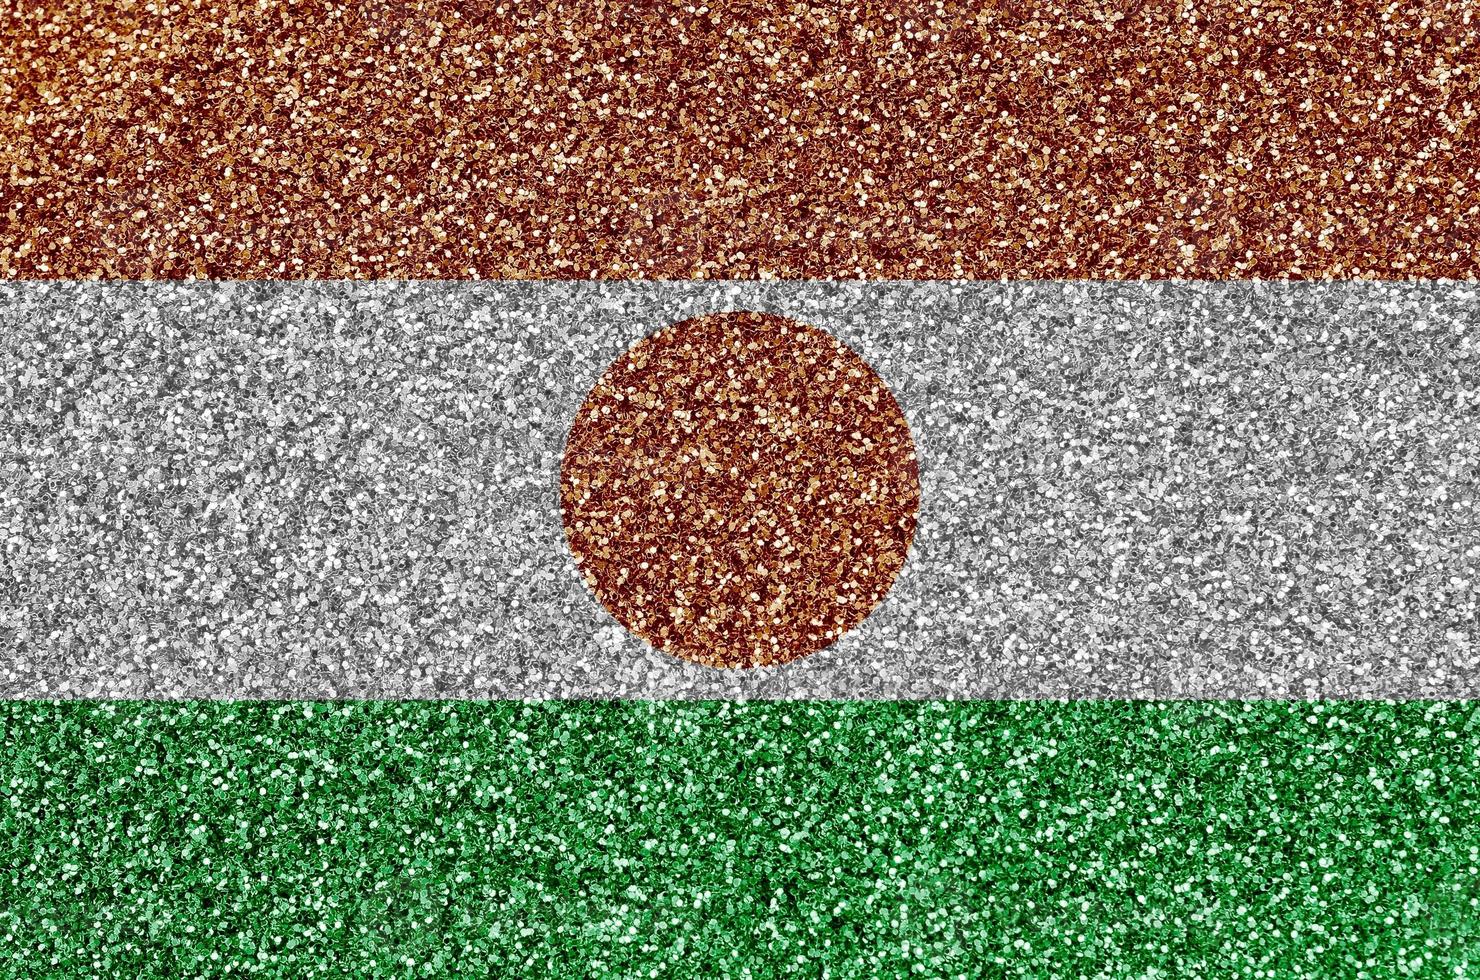 Niger flag depicted on many small shiny sequins. Colorful festival background for party photo